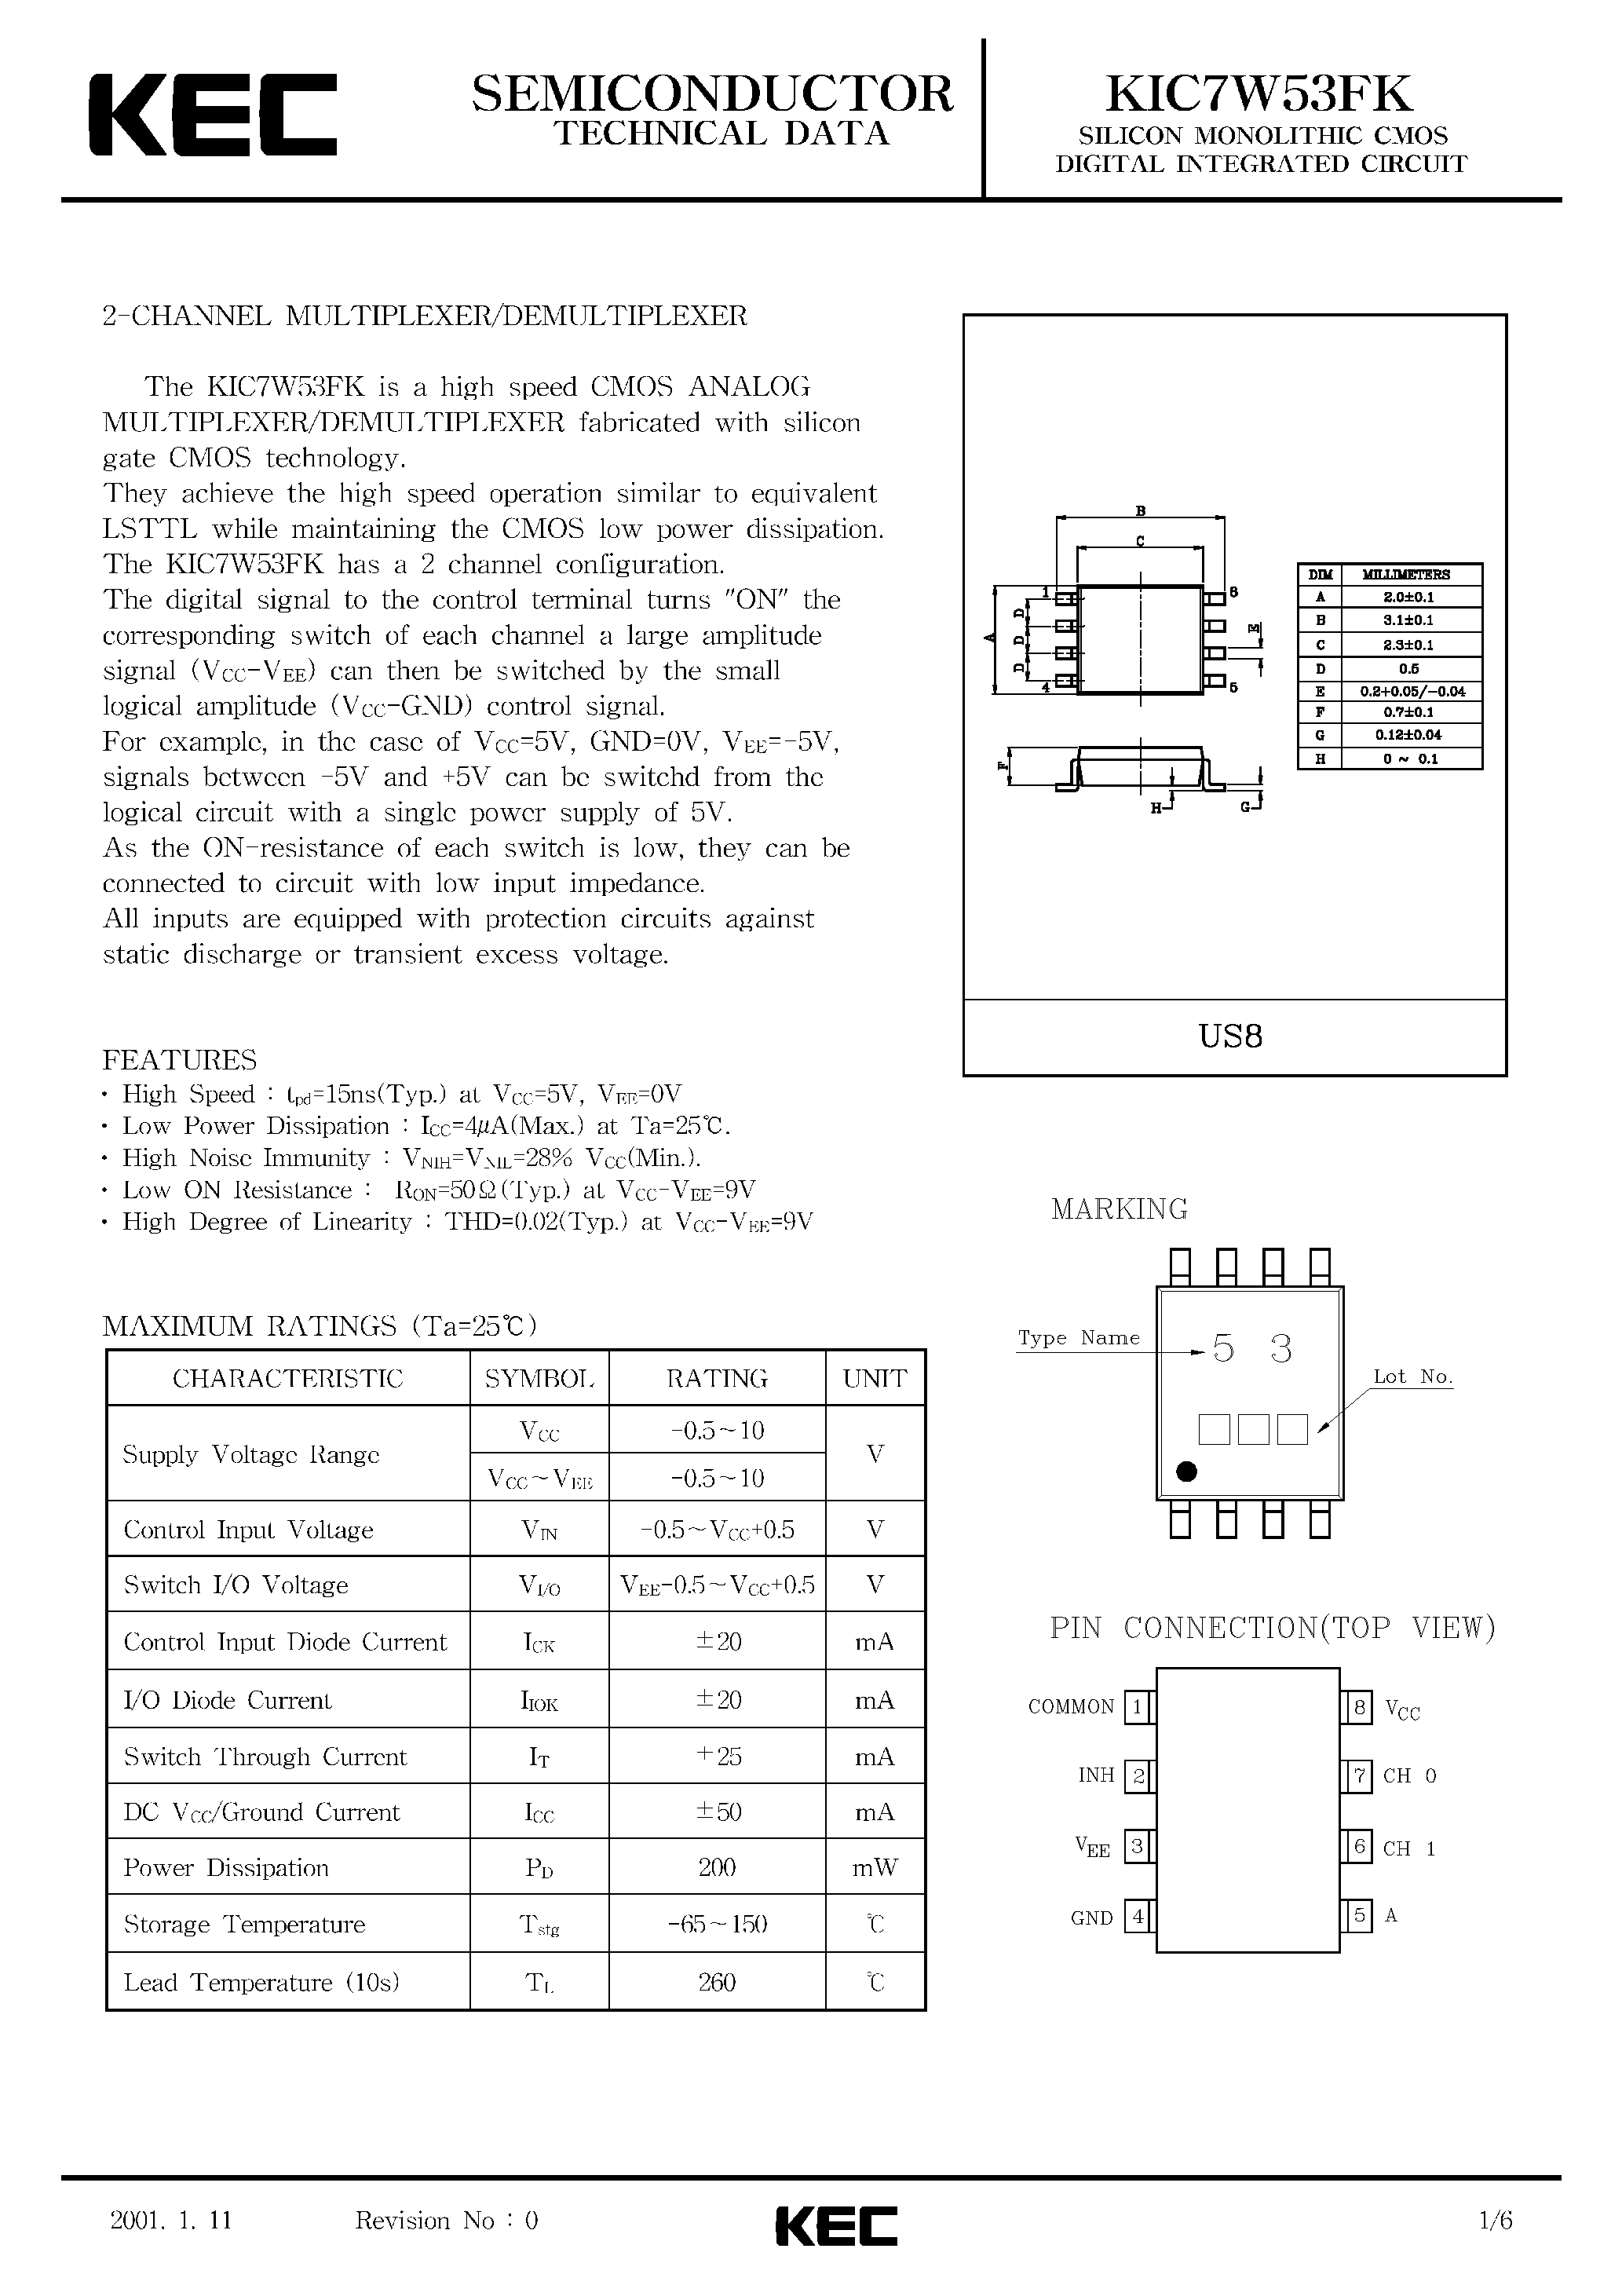 Datasheet KIC7W53 - SILICON MONOLITHIC CMOS DIGITAL INTEGRATED CIRCUIT(2-CHANNEL MULTIPLEXER/DEMULTIPLEXER) page 1